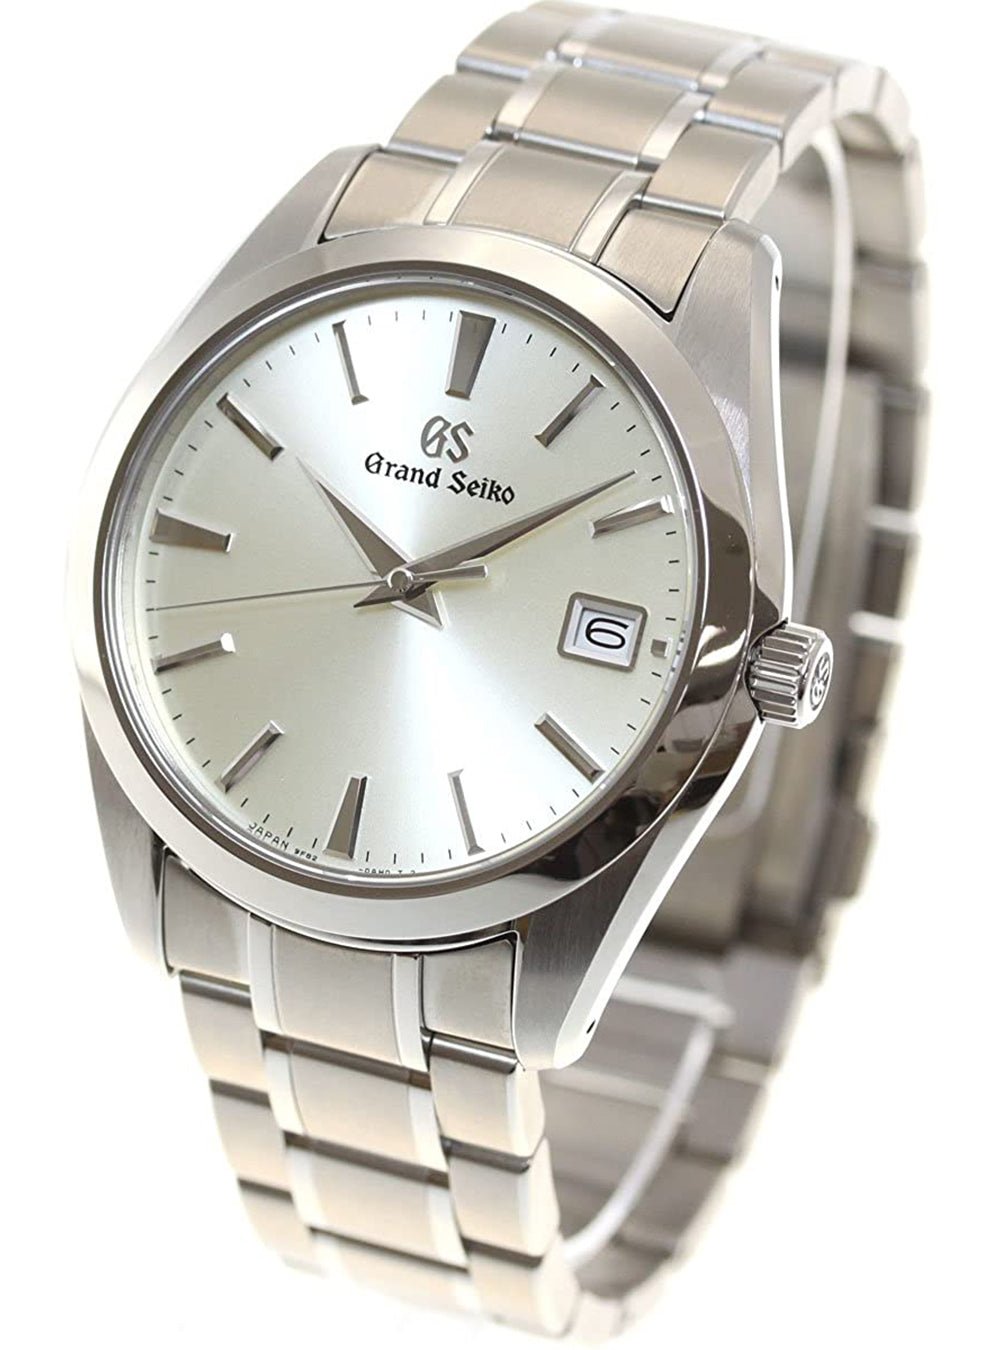 GRAND SEIKO HERITAGE COLLECTION SBGV229 MADE IN JAPAN JDM